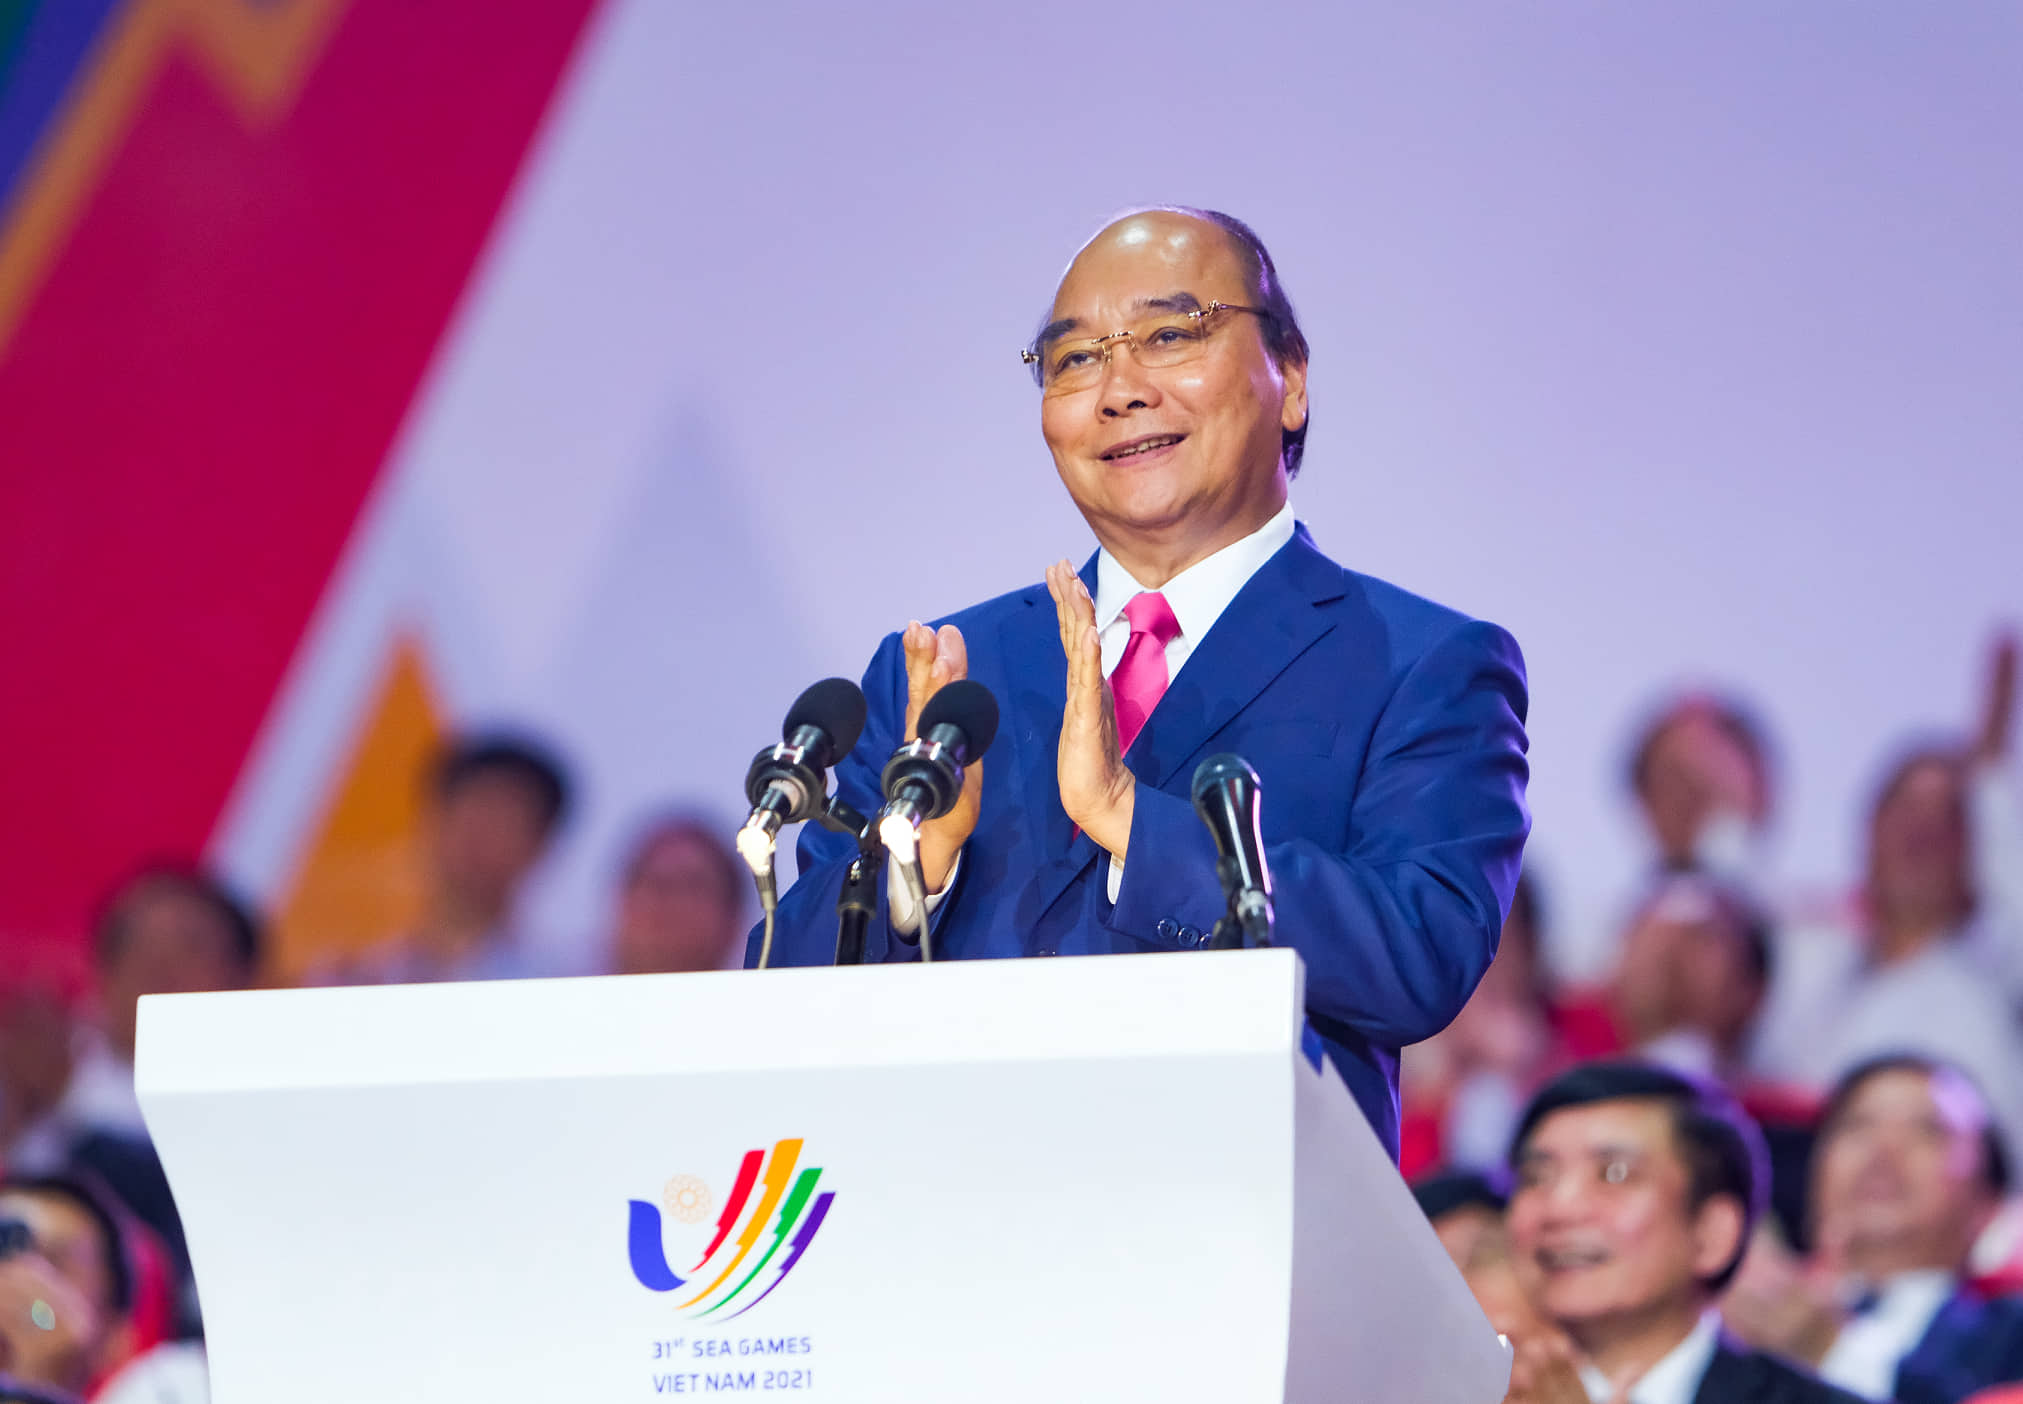 Vietnamese State President Nguyen Xuan Phuc declares the 31st Southeast Asian (SEA) Games officially open at My Dinh National Stadium in Hanoi, Vietnam, May 12, 2022. Photo: Nam Tran / Tuoi Tre